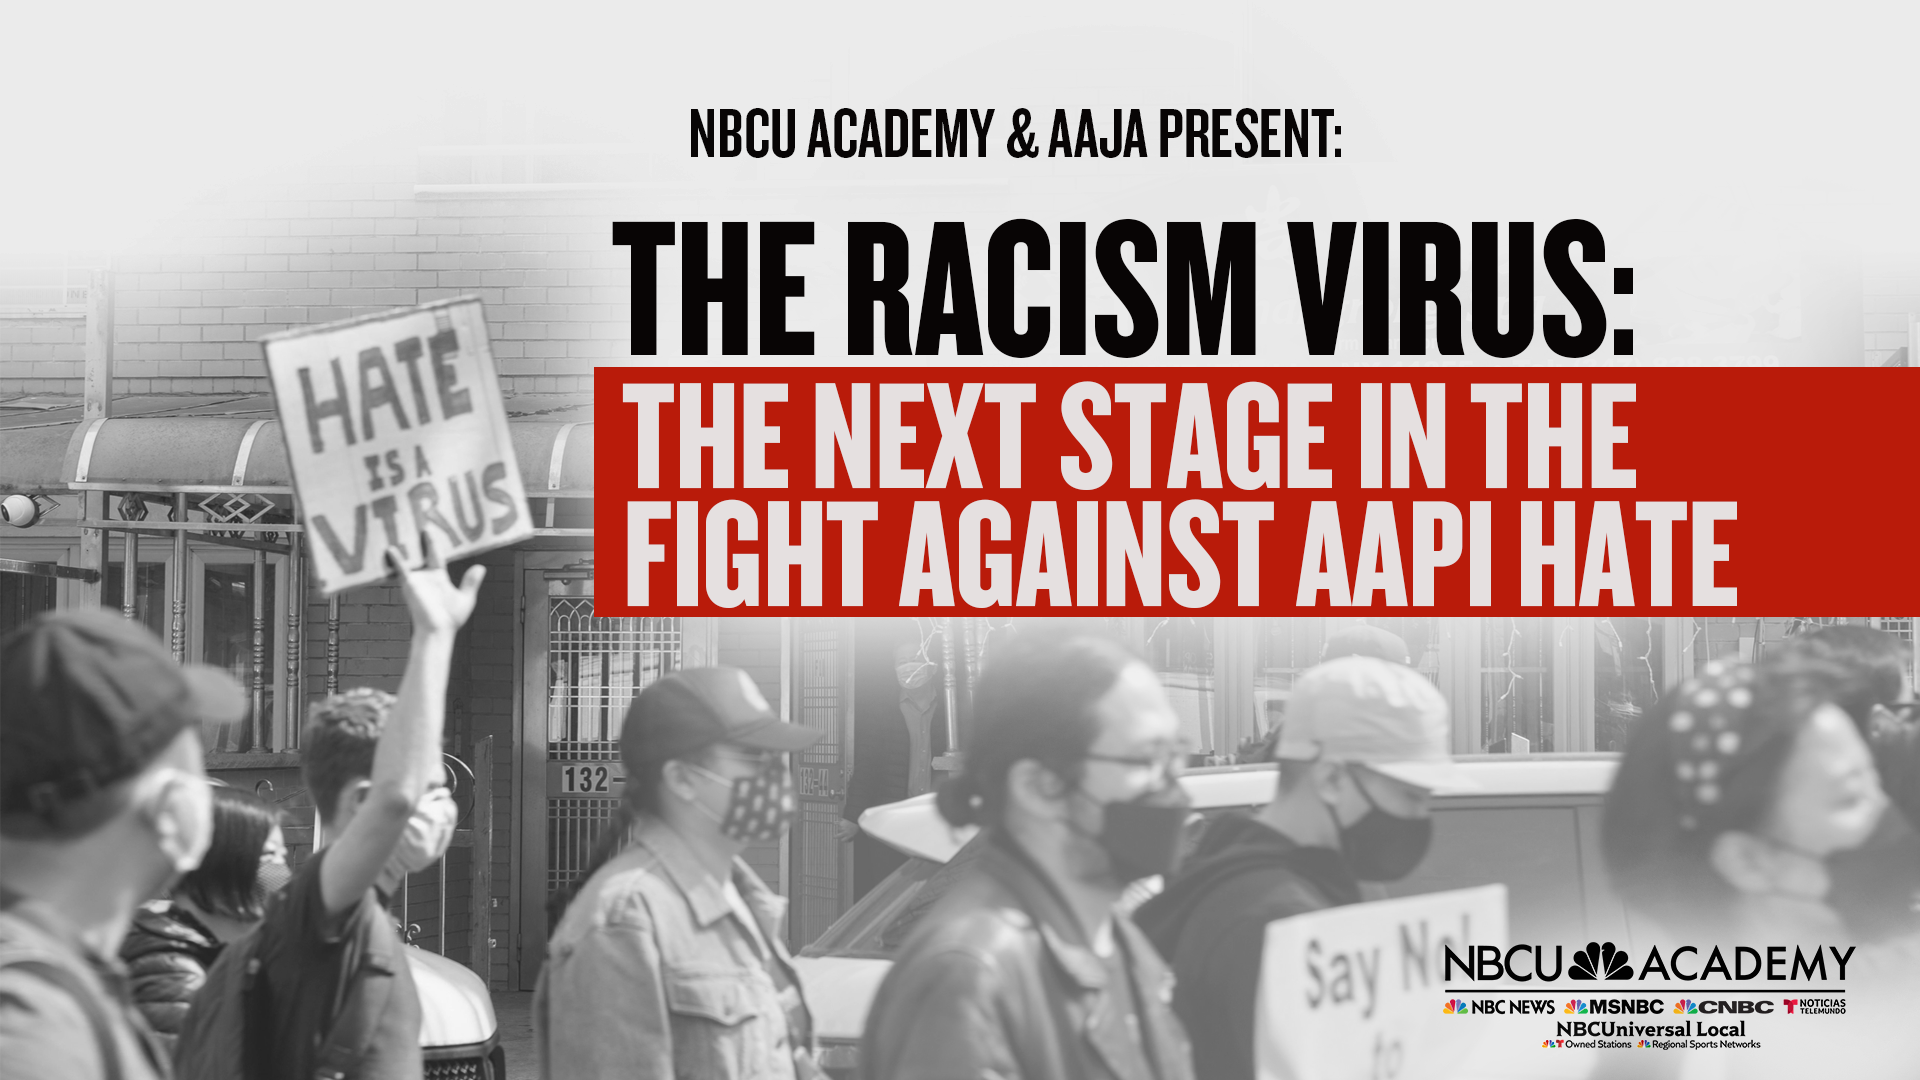 NBCU Academy & AAJA Present The Racism Virus: The Next Stage in the Fight Against AAPI Hate